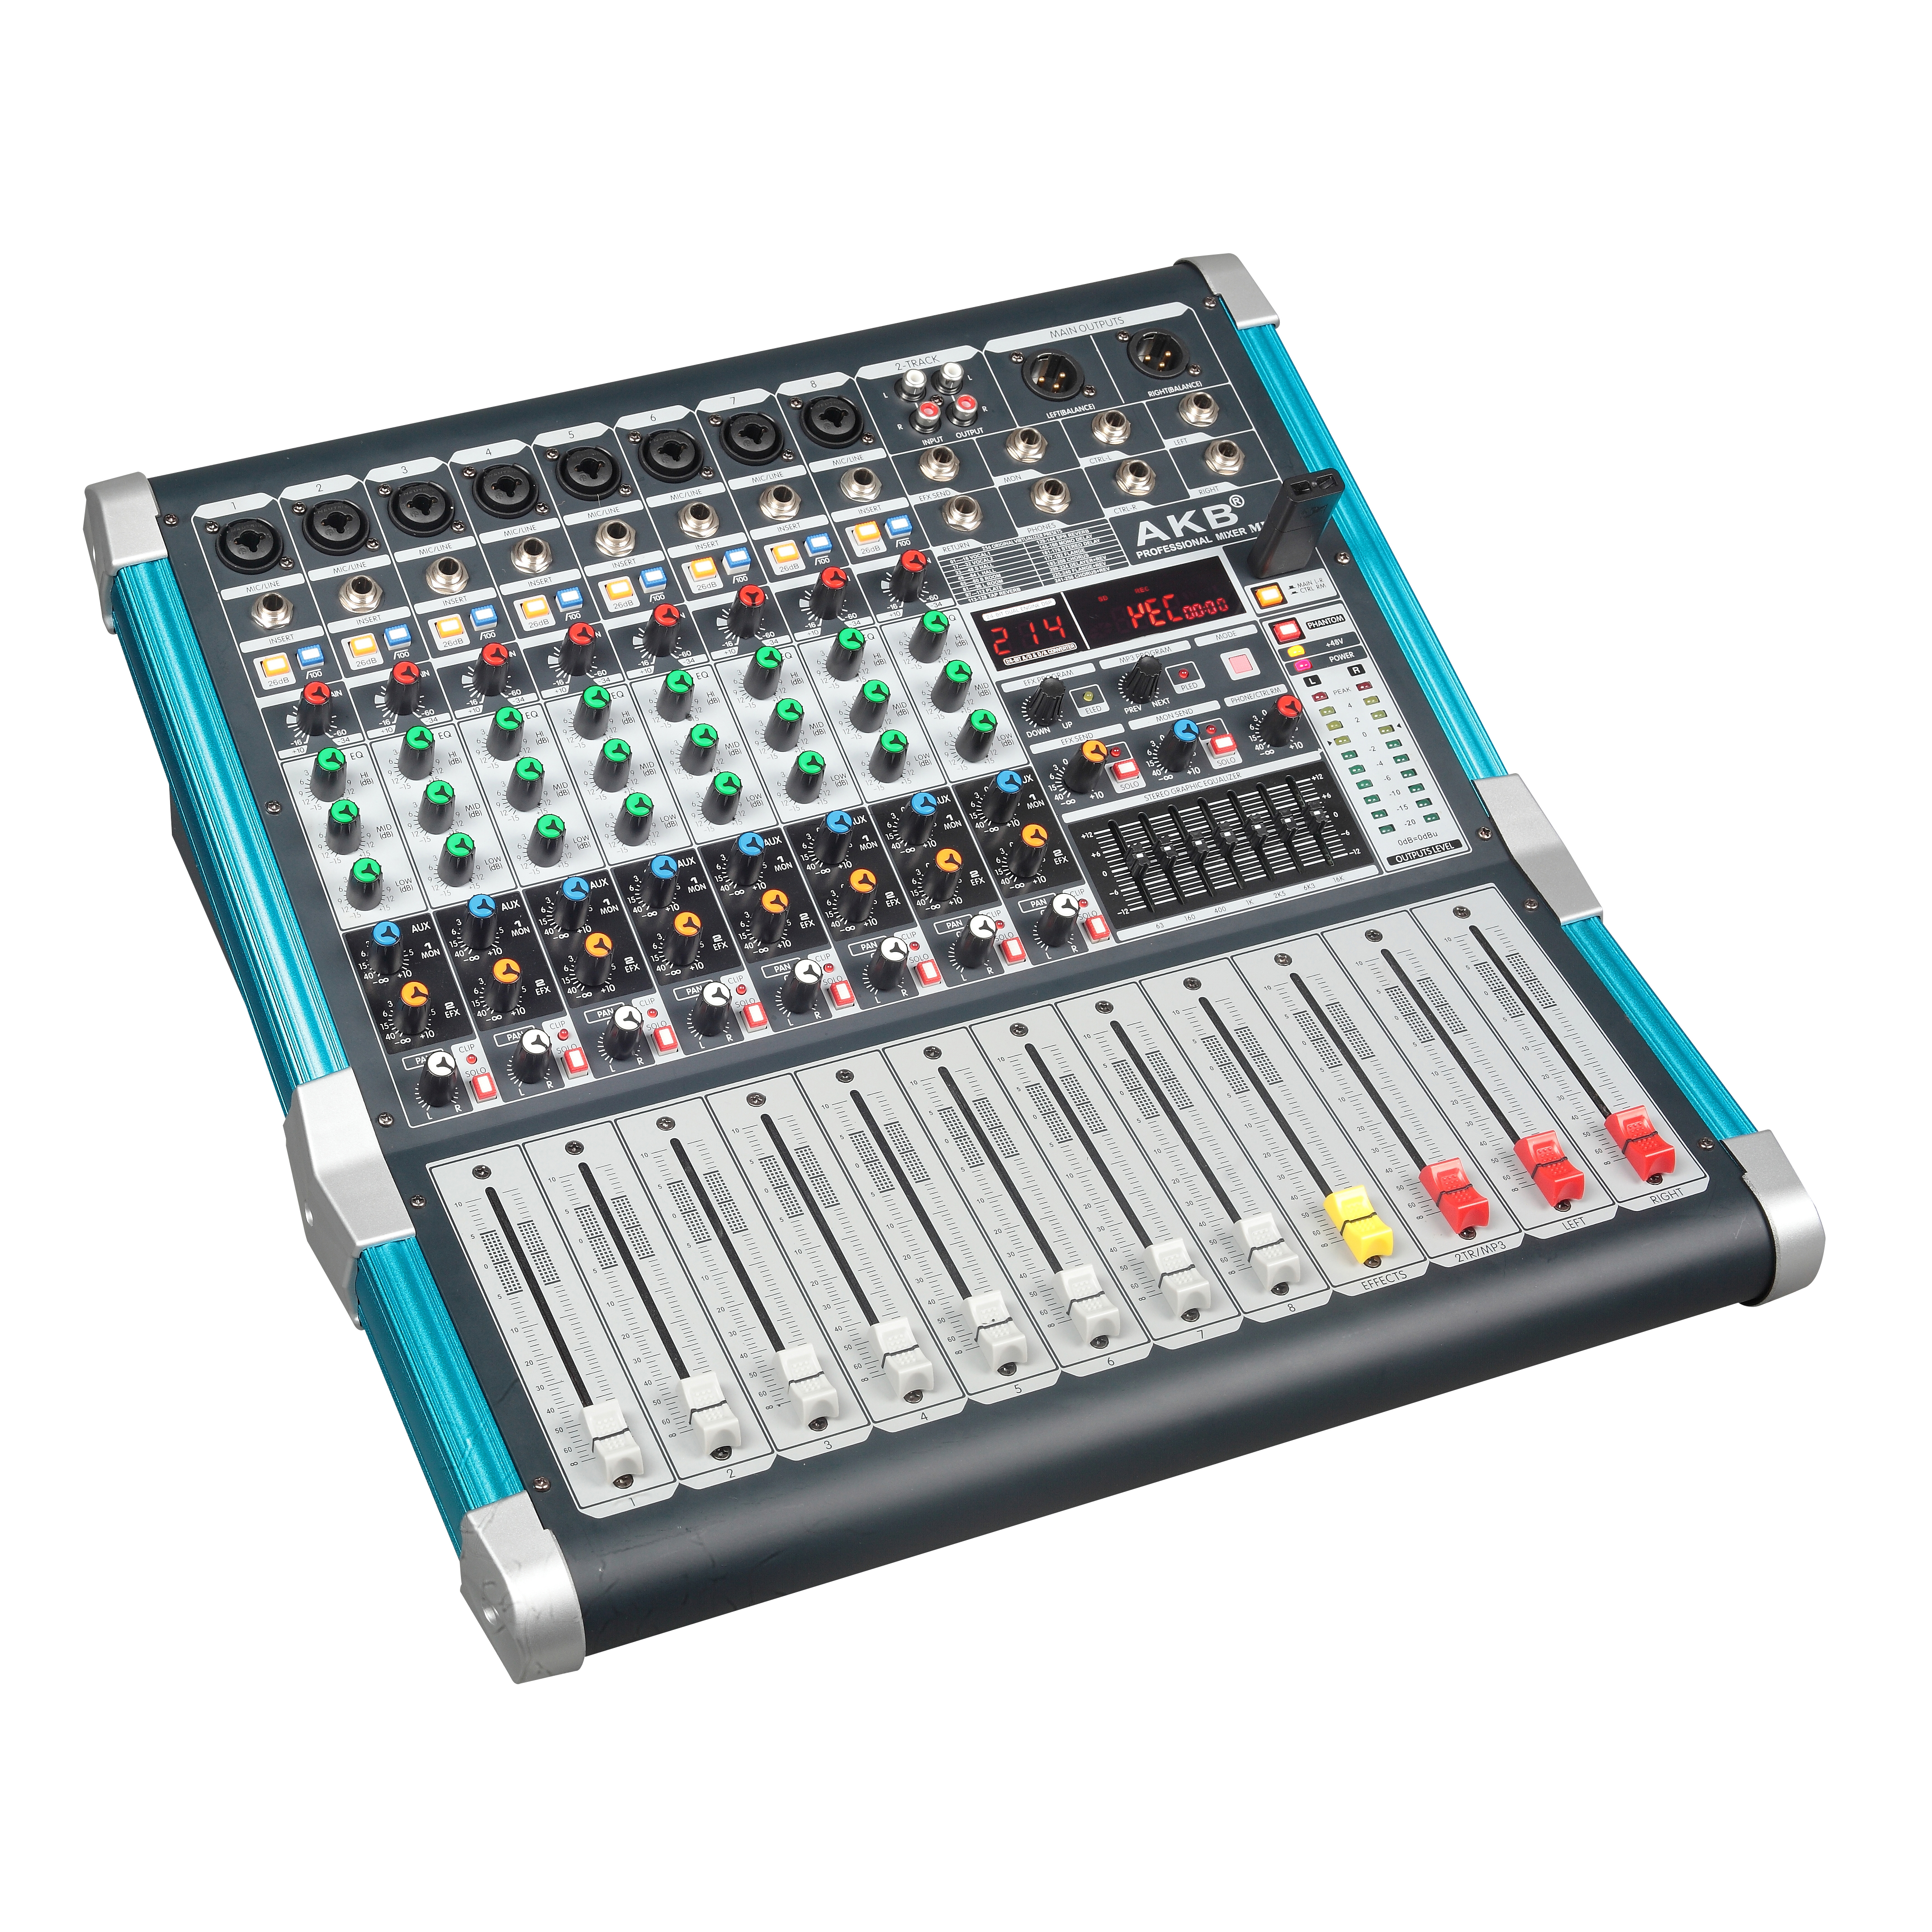 How to Choose a USB/Power/Sound Mixer?